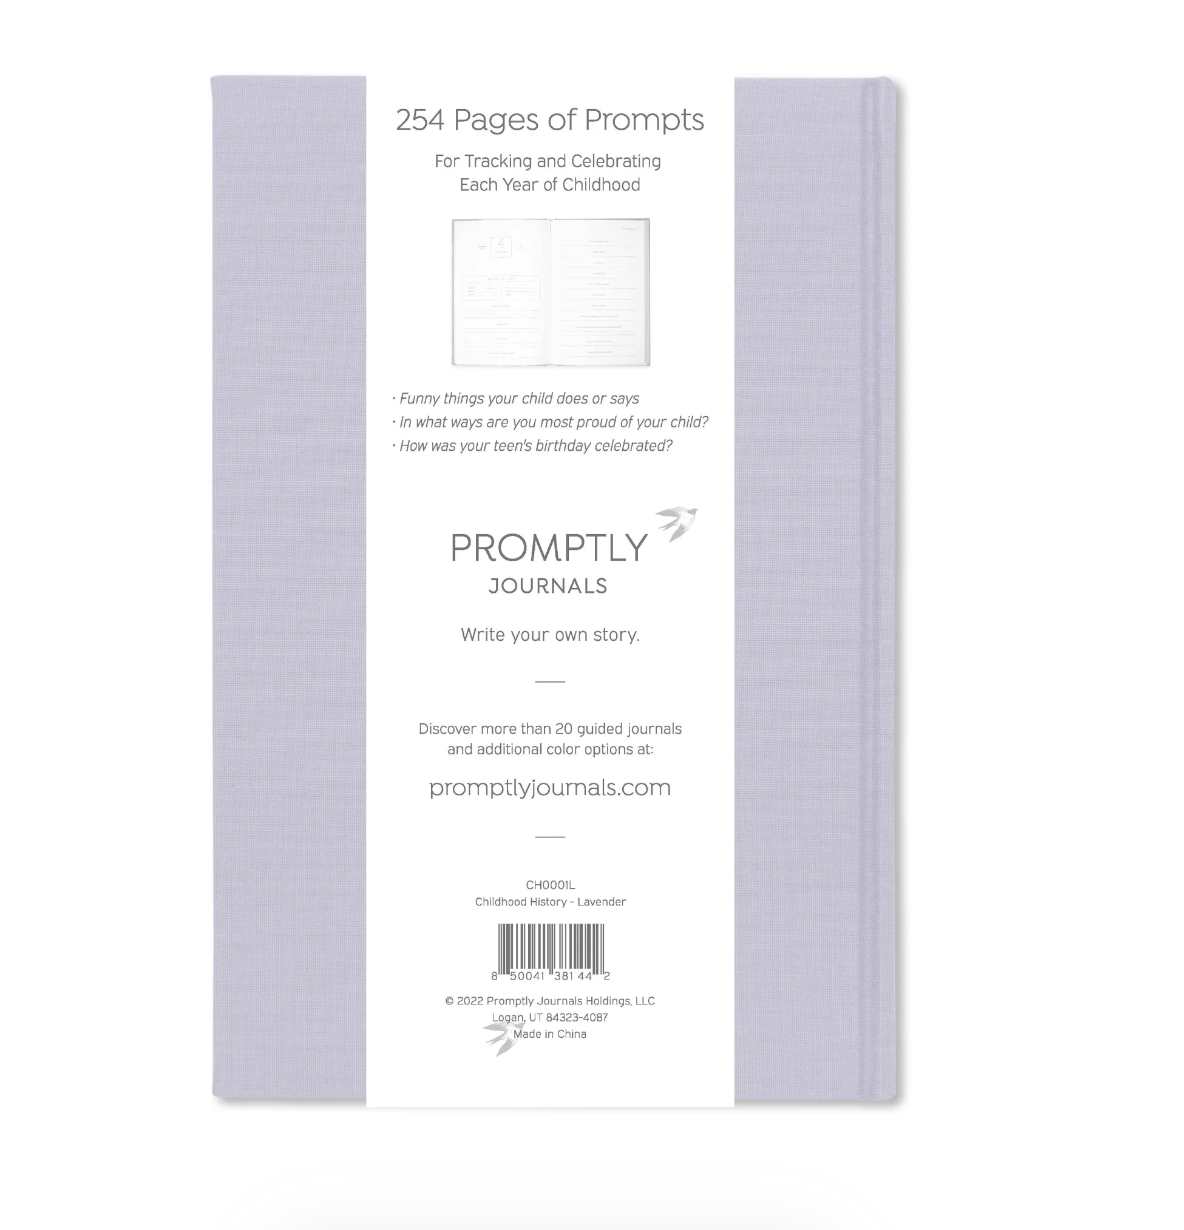 This lavender color childhood history journal has prompts to help parents write their child's story in each phase as a keepsake. This journal is from promptly and sold at BBB Supplies Craft Shop.